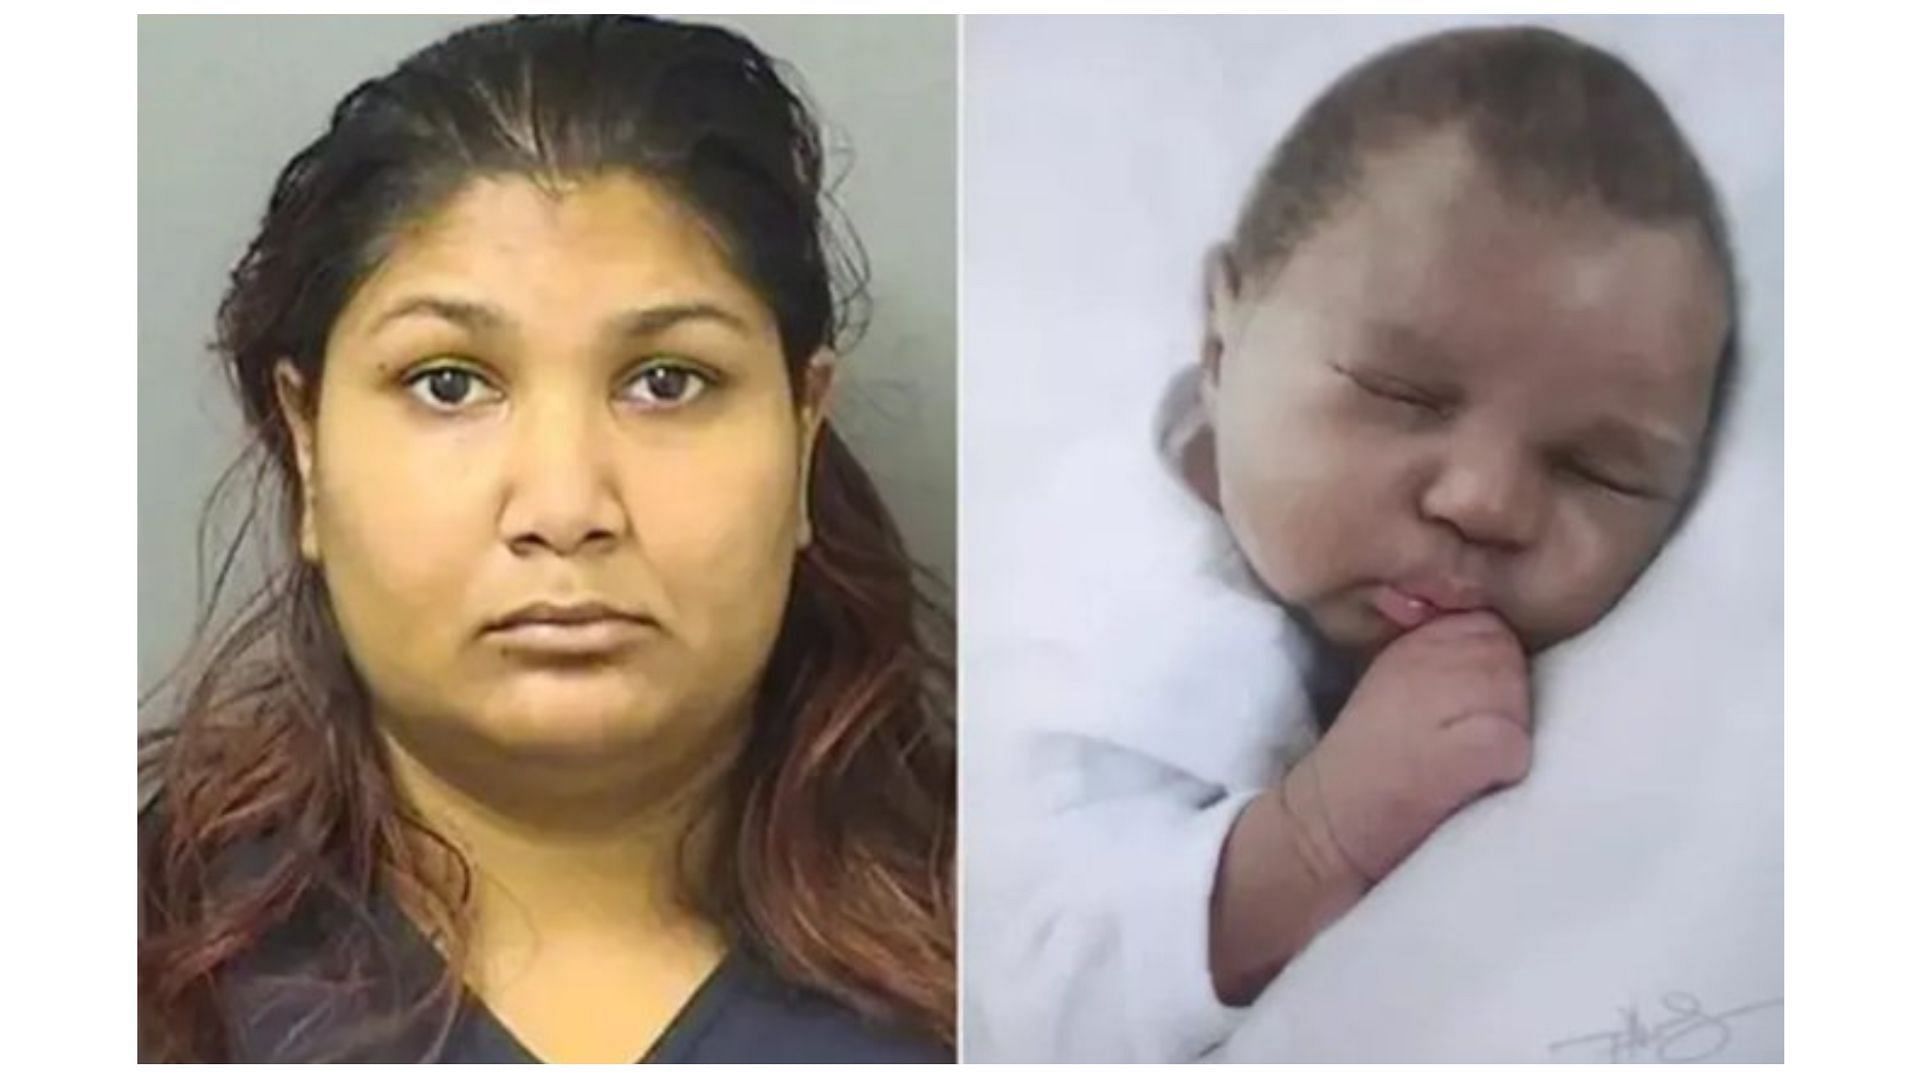 Arya Singh arrested for tossing her infant in water, (Images via Palm Beach County Sheriff)